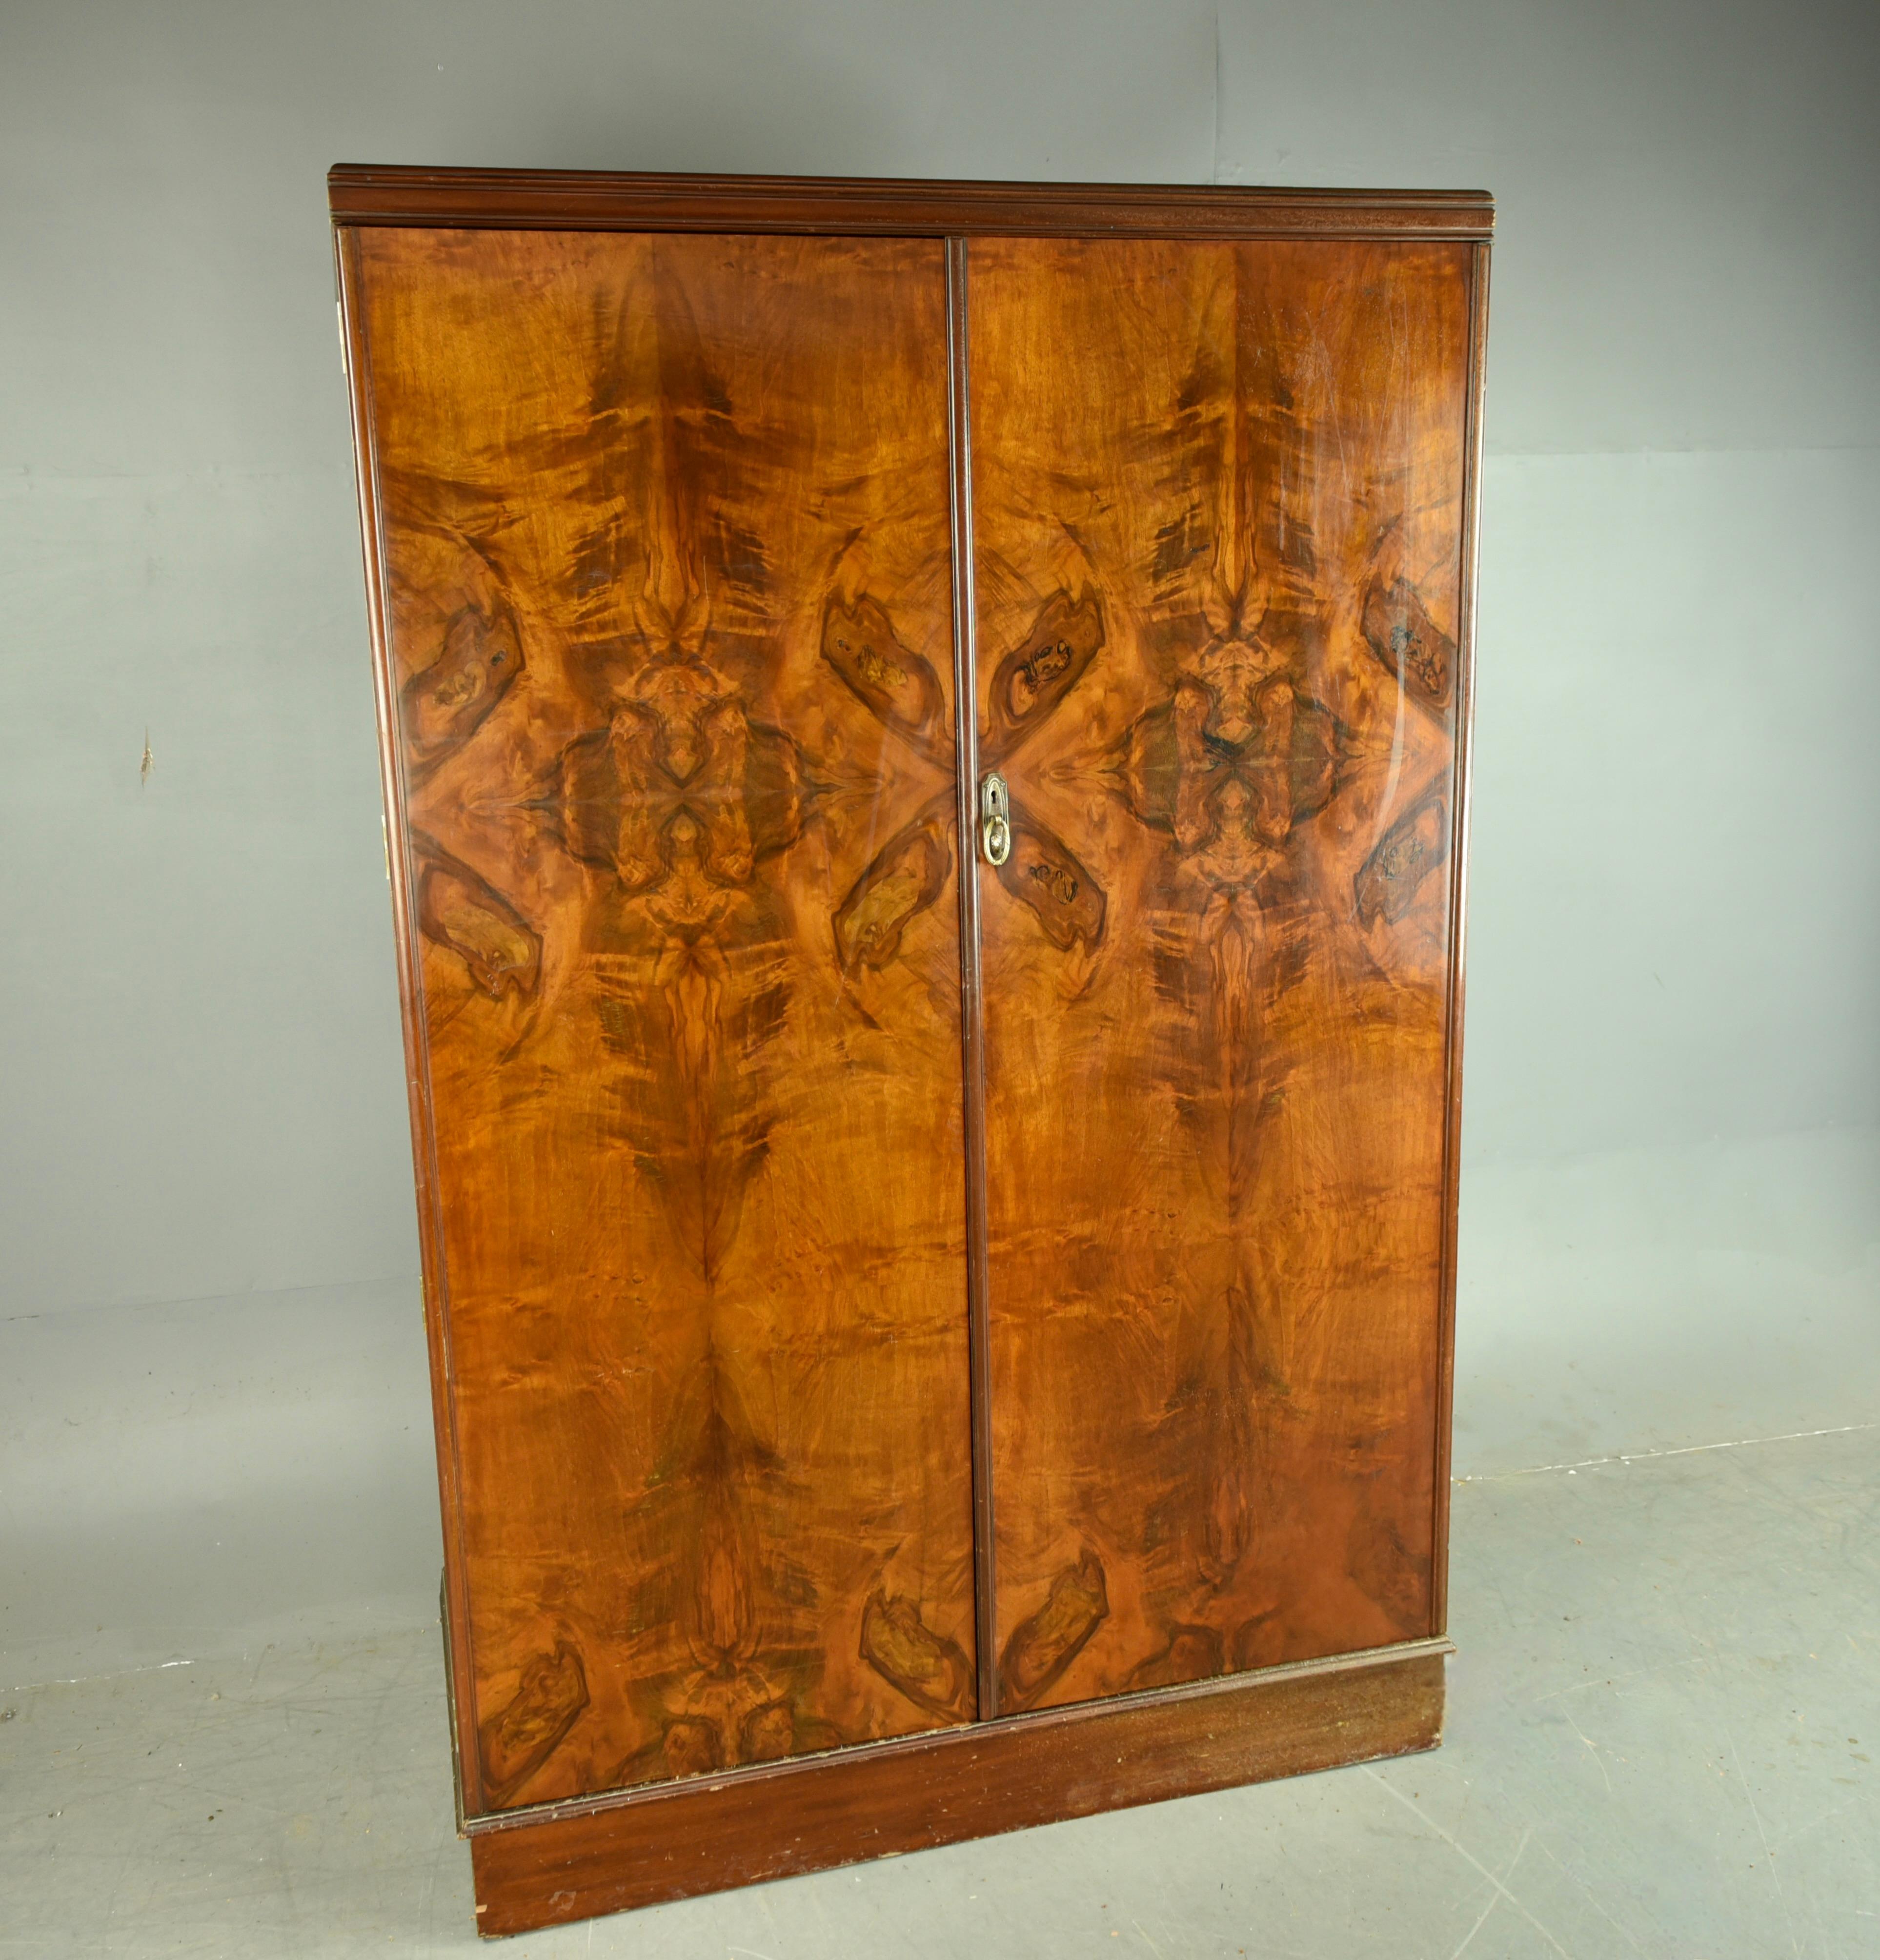 Iconic Art Deco walnut Gentlemens wardrobe The VALET 
The wardrobe has a fully fitted interior with glass fronted drop down shelves drawers and trouser hangers .
The wardrobe is in great condition with some light marks associated with use .
The